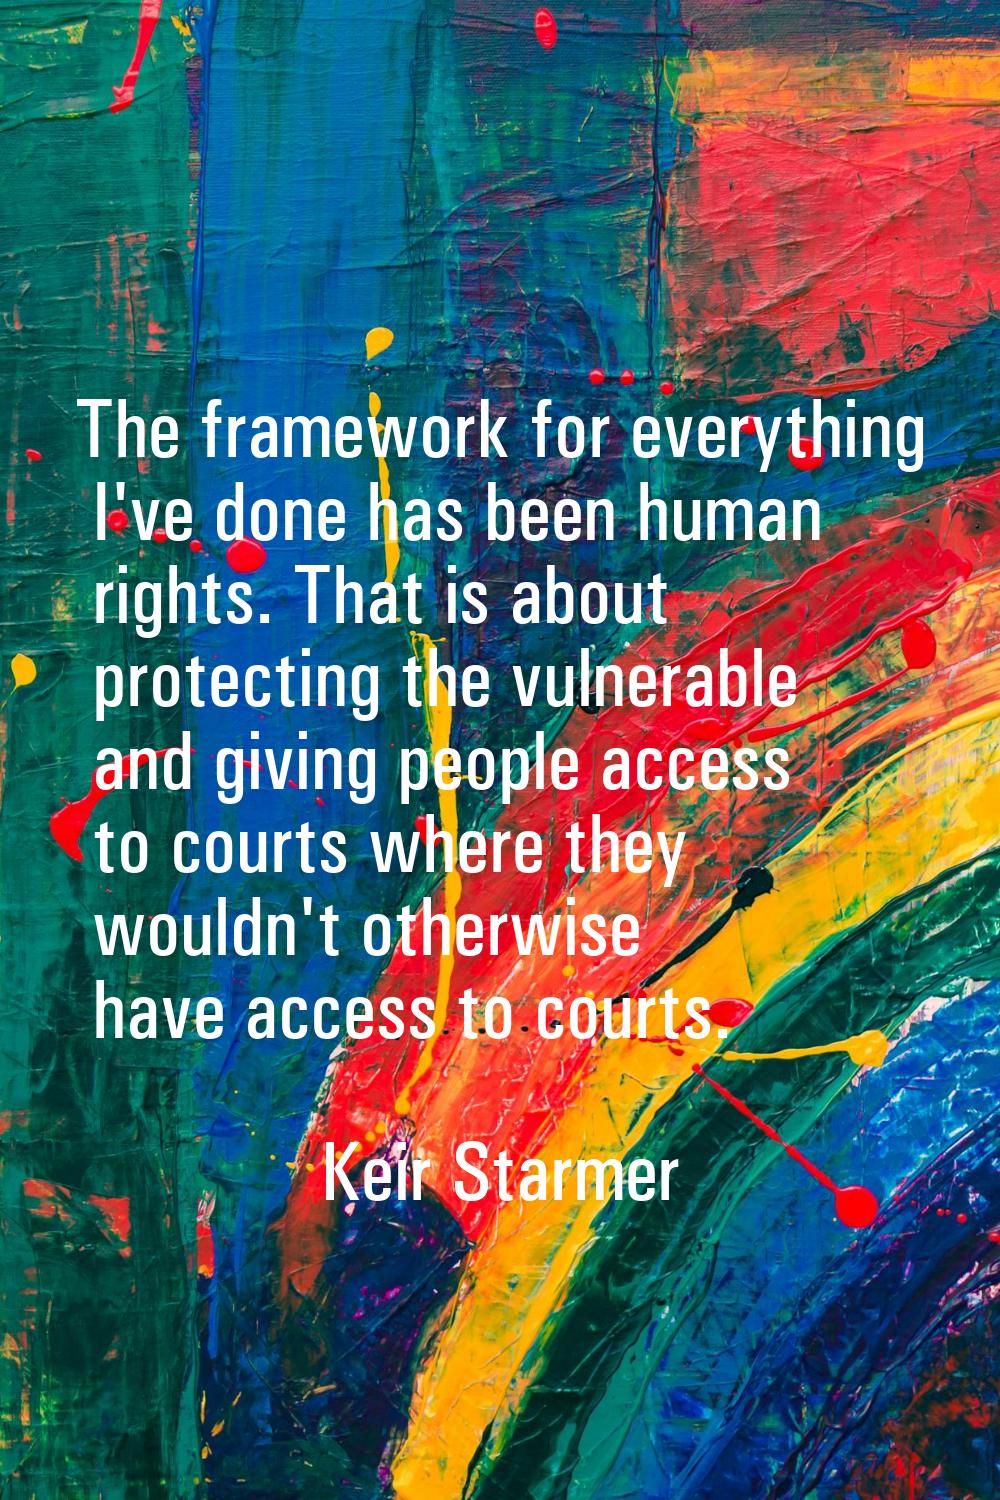 The framework for everything I've done has been human rights. That is about protecting the vulnerab